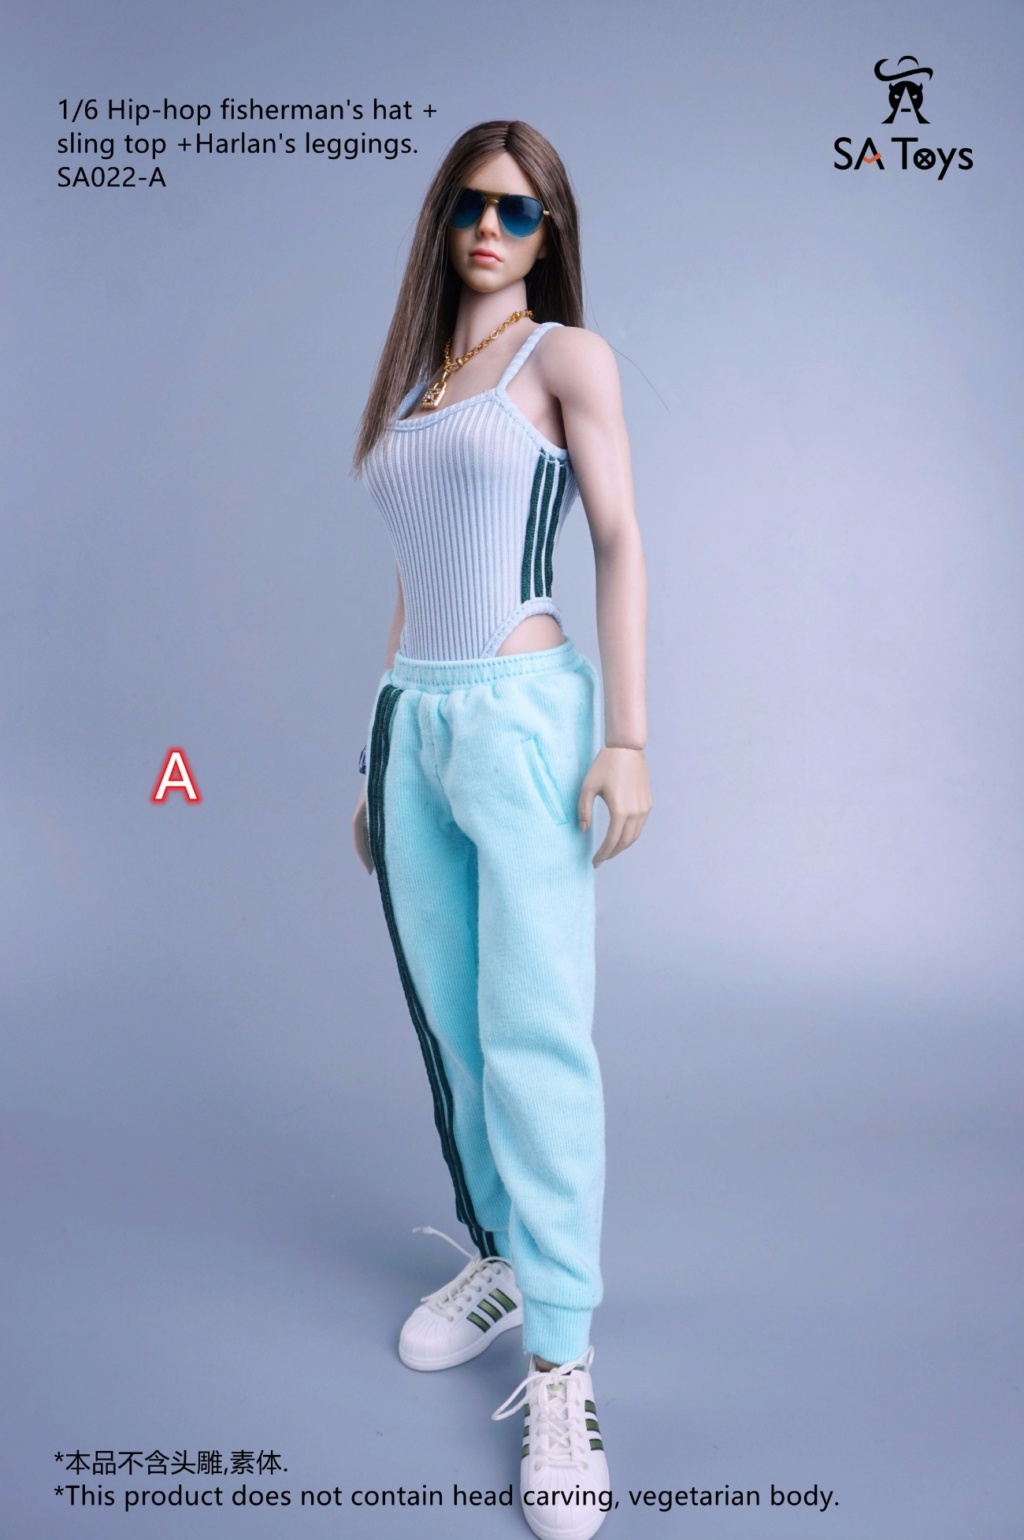 fashionablesportshoody - NEW PRODUCT: SA Toys: 1/6 hip skirt / floral elastic skirt / fashionable sports style hooded sweater cover, hip-hop fisherman hat halter and footwear casual pants [variety optional] 21402710